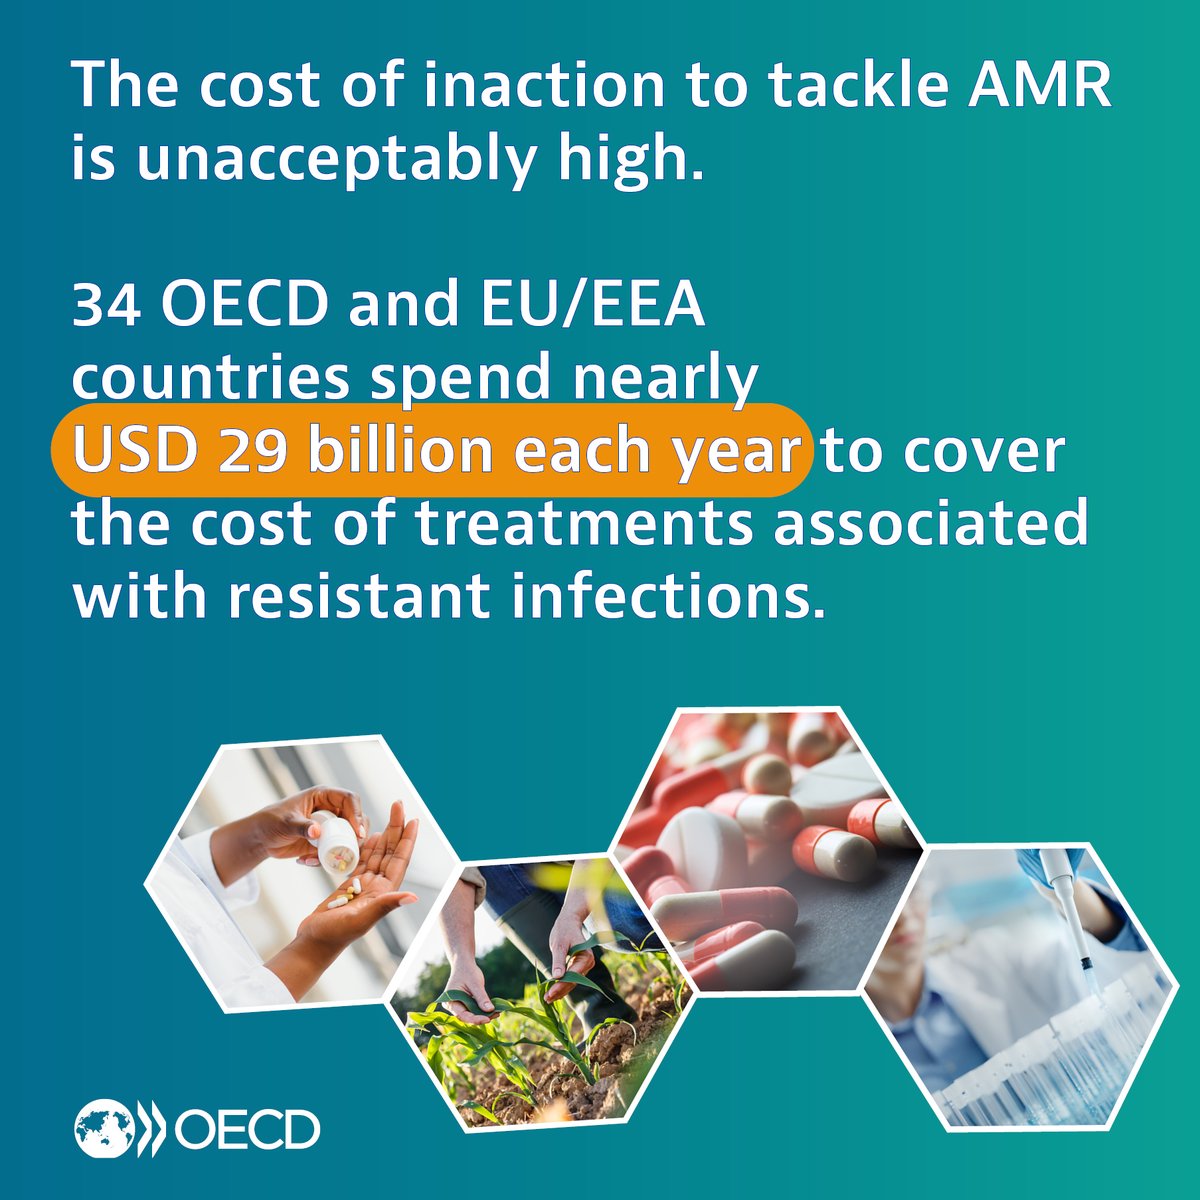 The cost of inaction to tackle #AMR is unacceptably high. 34 OECD & EU/EEA countries spend nearly USD 29 billion each year to cover the cost of treatments associated w/ resistant infections. See analysis here 👉 oe.cd/AMR #AntimicrobialResistance #OneHealth #WAAW